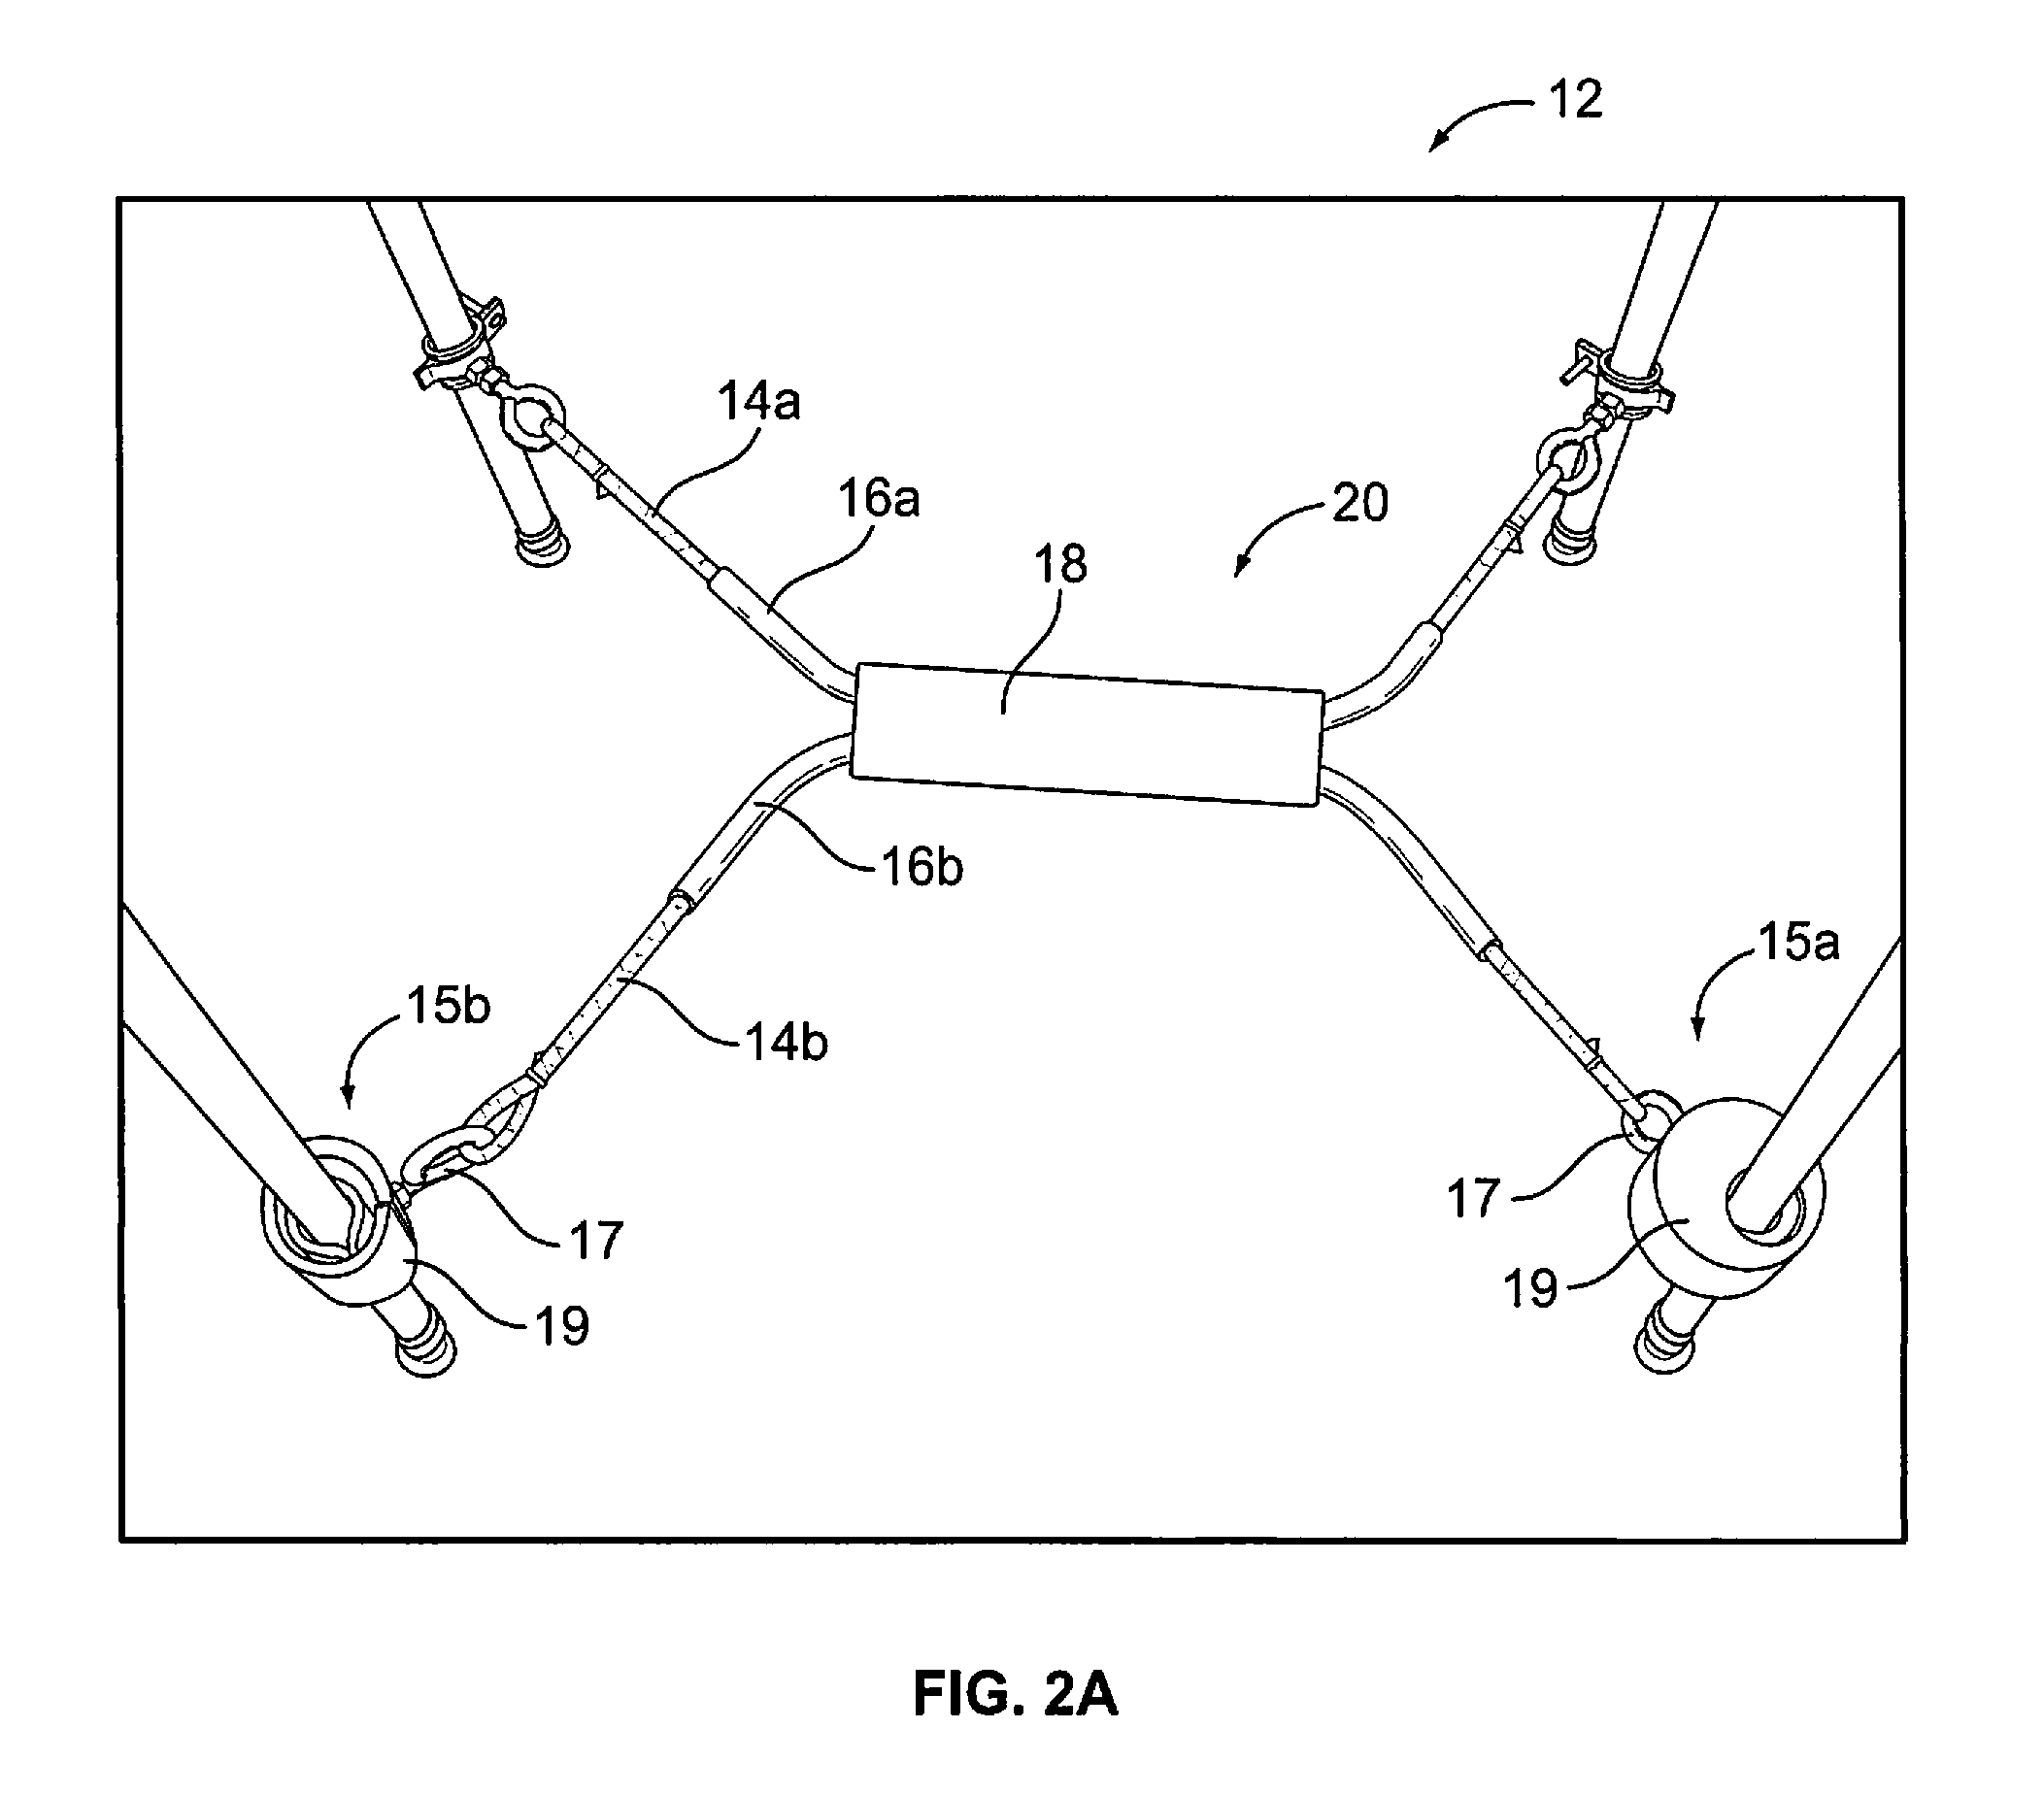 Physical activity apparatus and kit